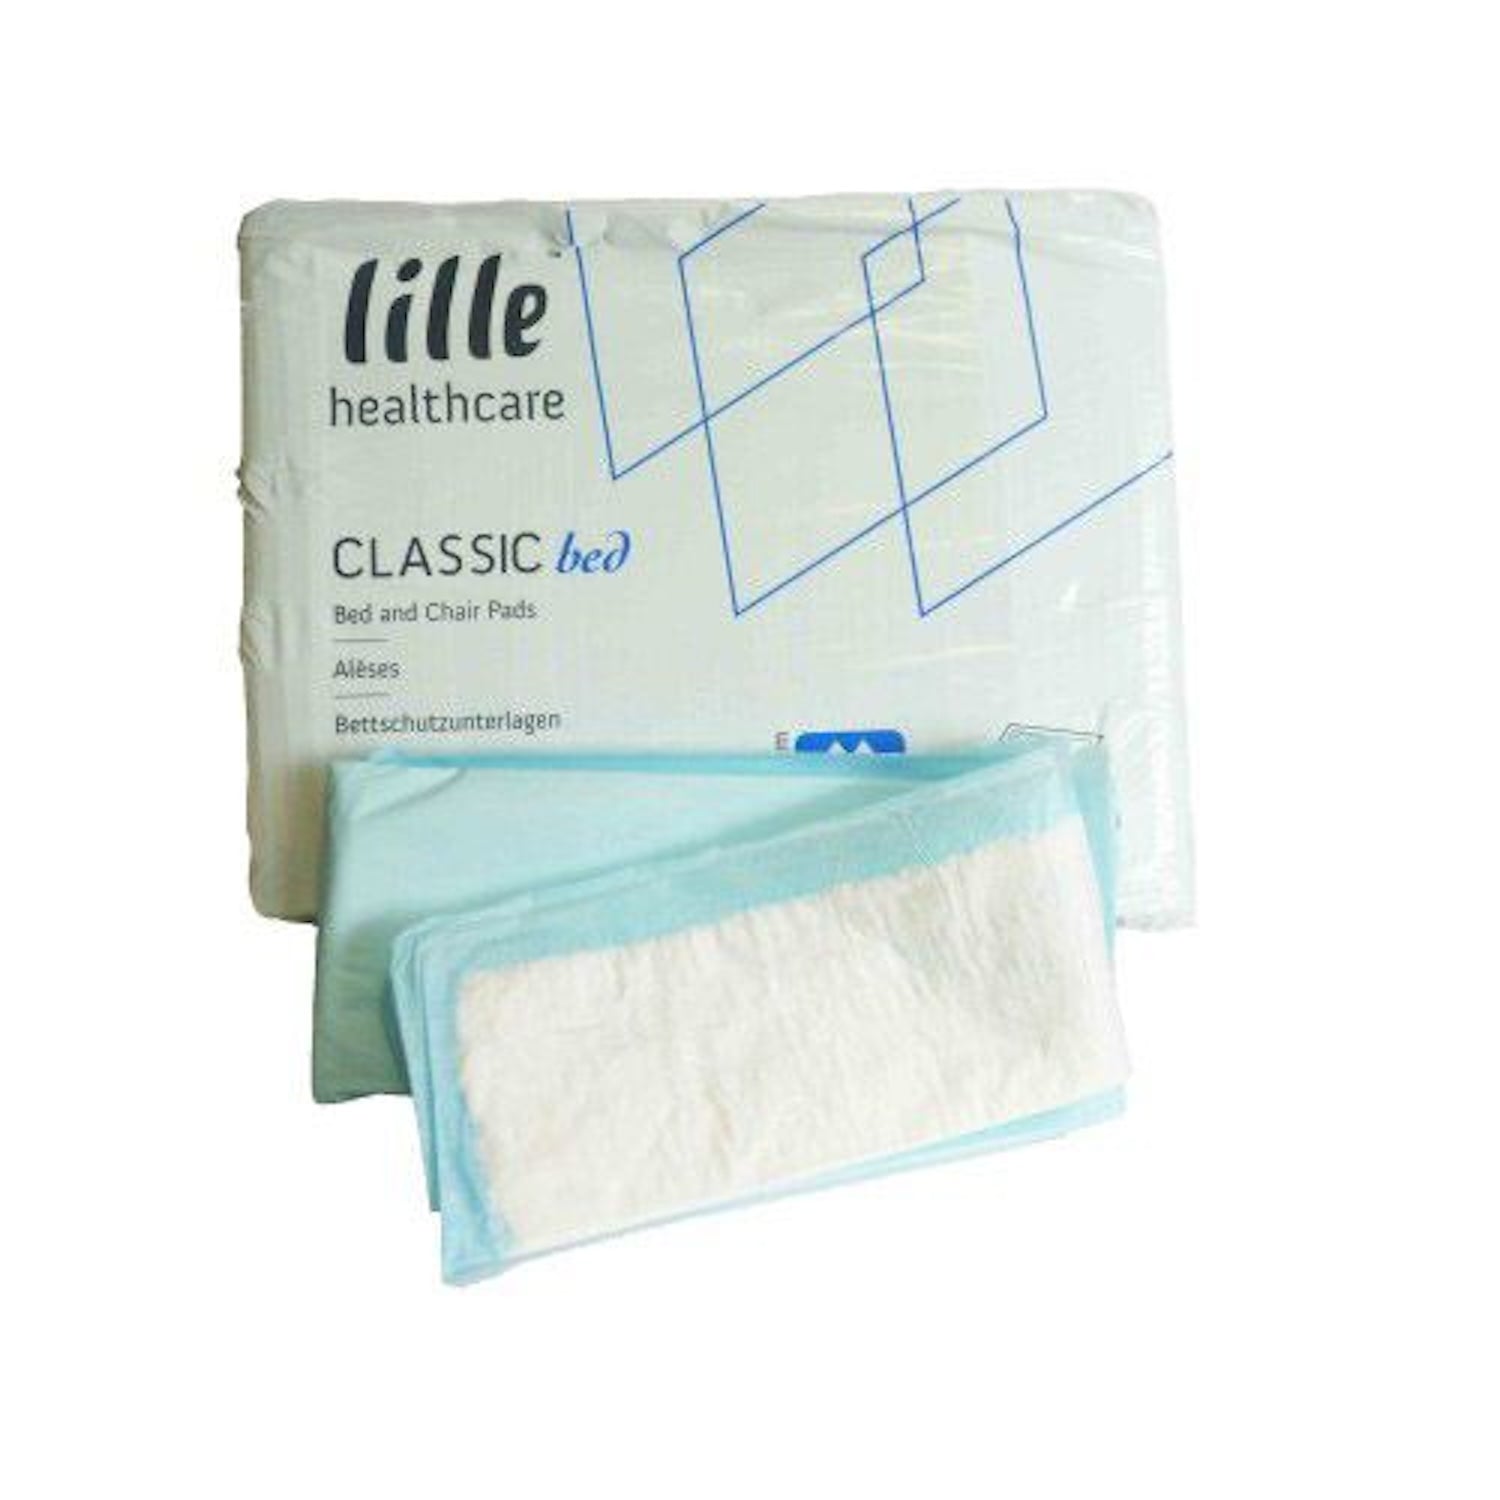 Lille Classic Bed Maxi | 60 x 90cm | Case of 4 (1)